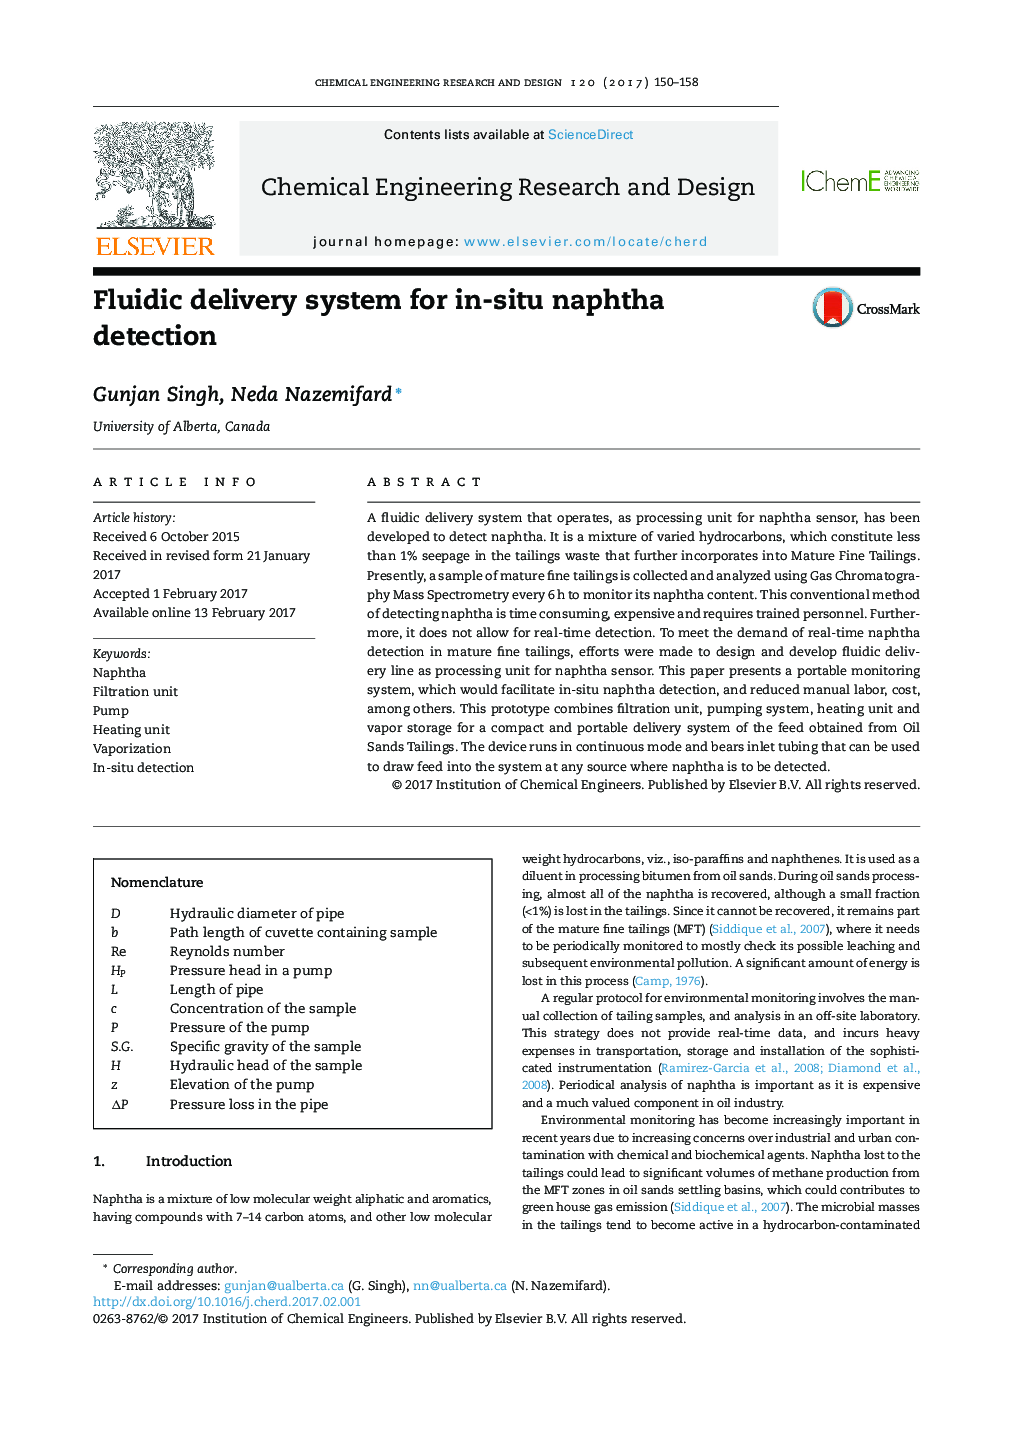 Fluidic delivery system for in-situ naphtha detection